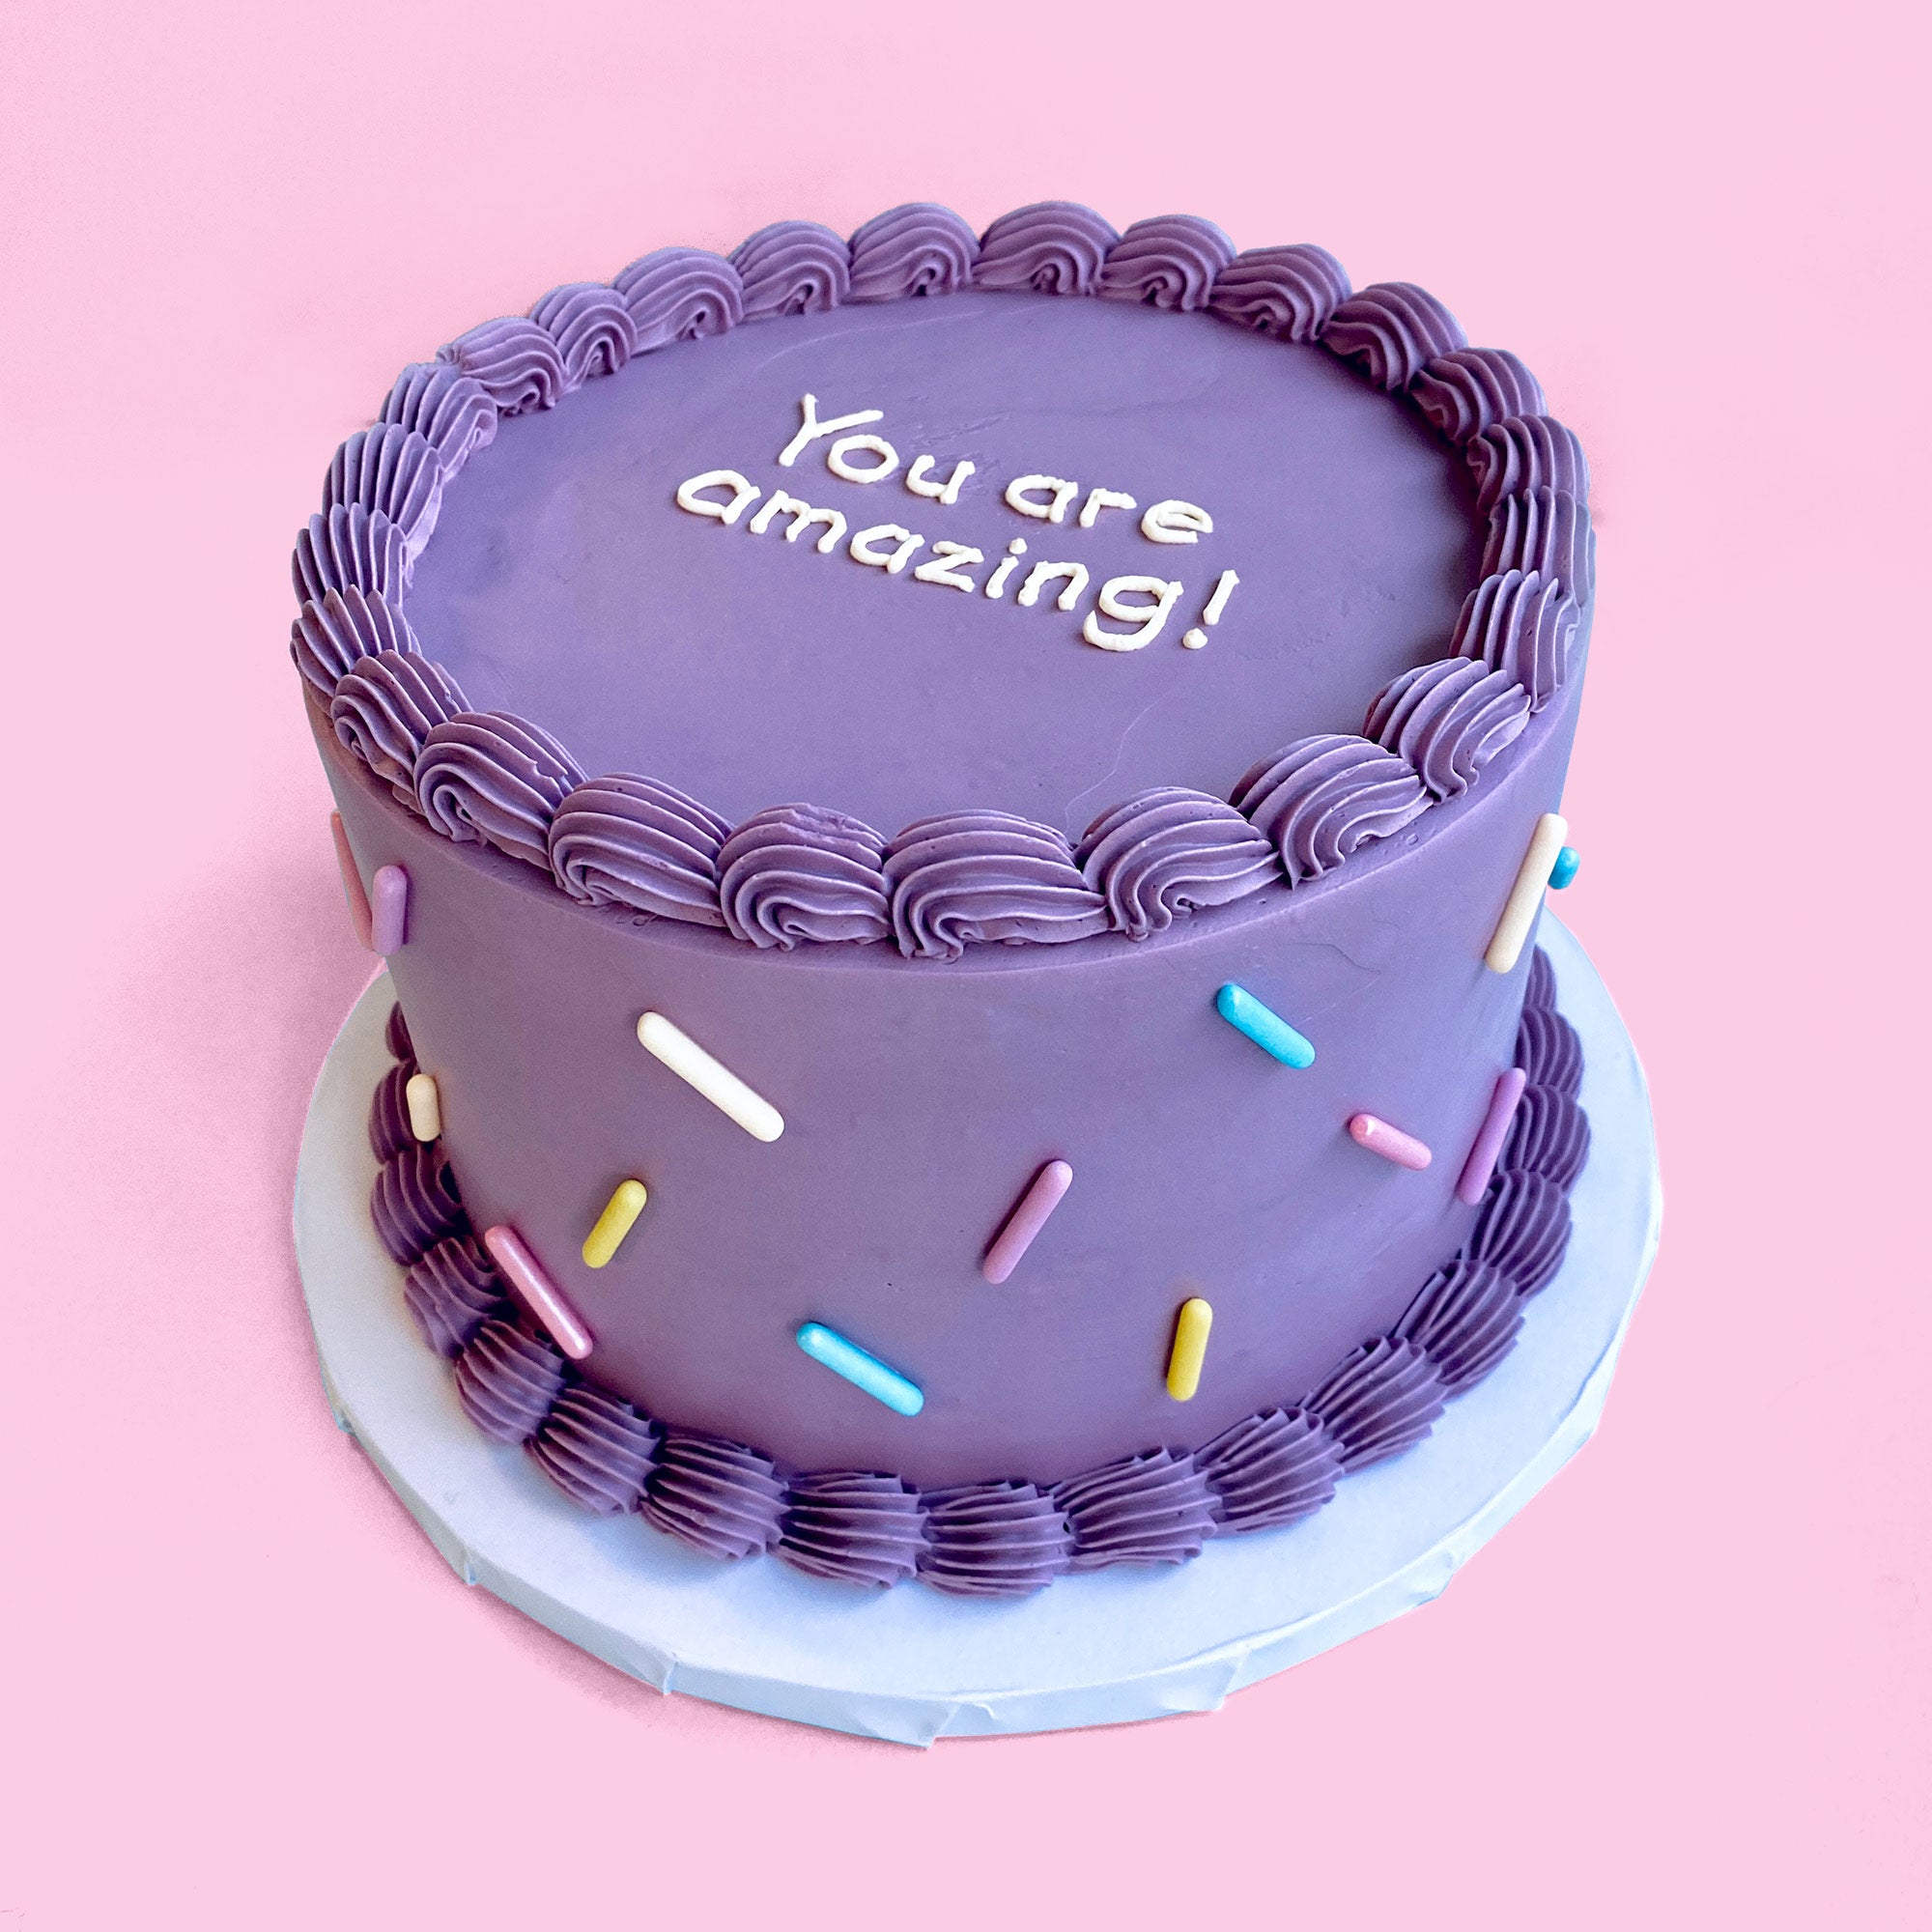 49 Cute Cake Ideas For Your Next Celebration : Purple Cake with gold accent